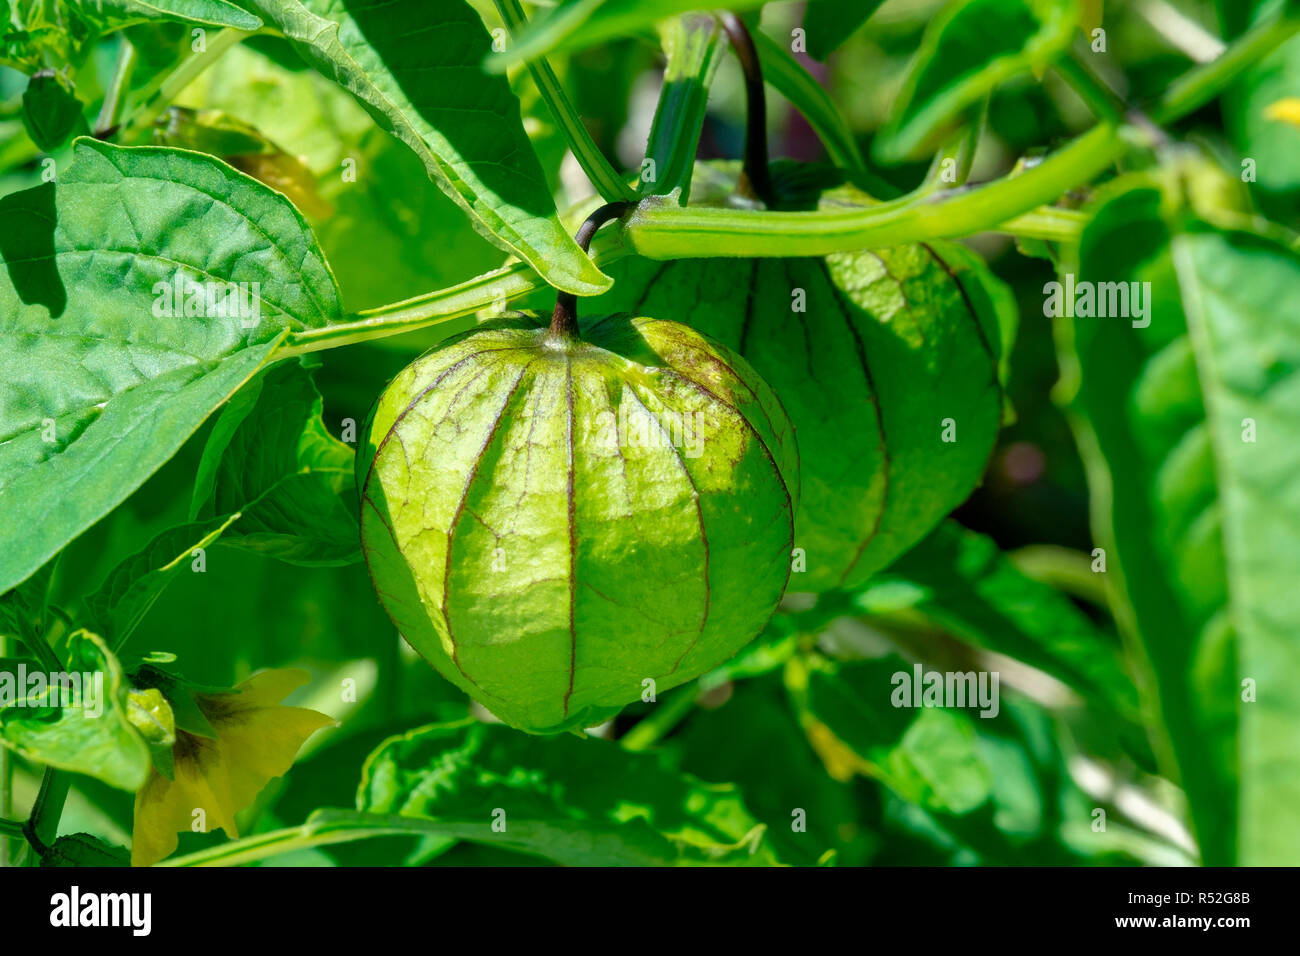 Tomatillos used for making salsa verde growing on the vine Stock Photo